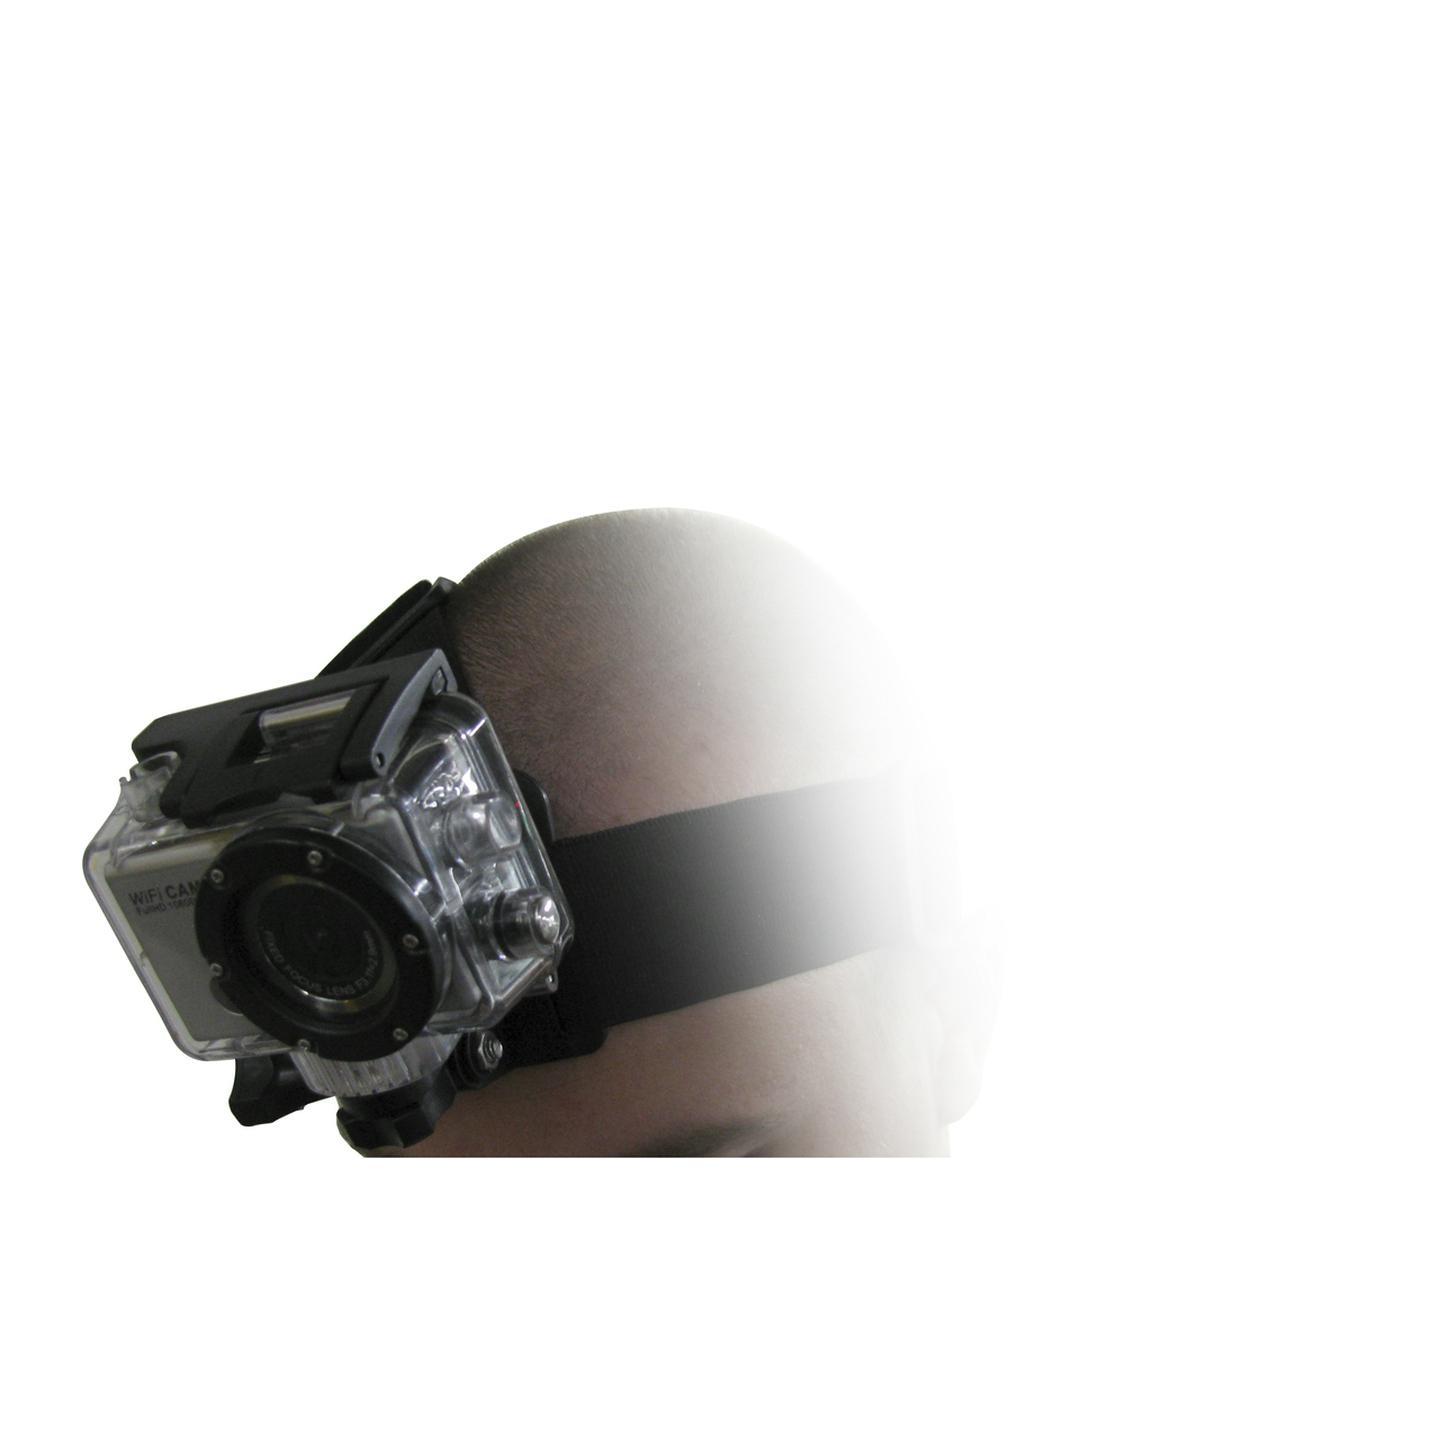 Head Strap for Action Cameras